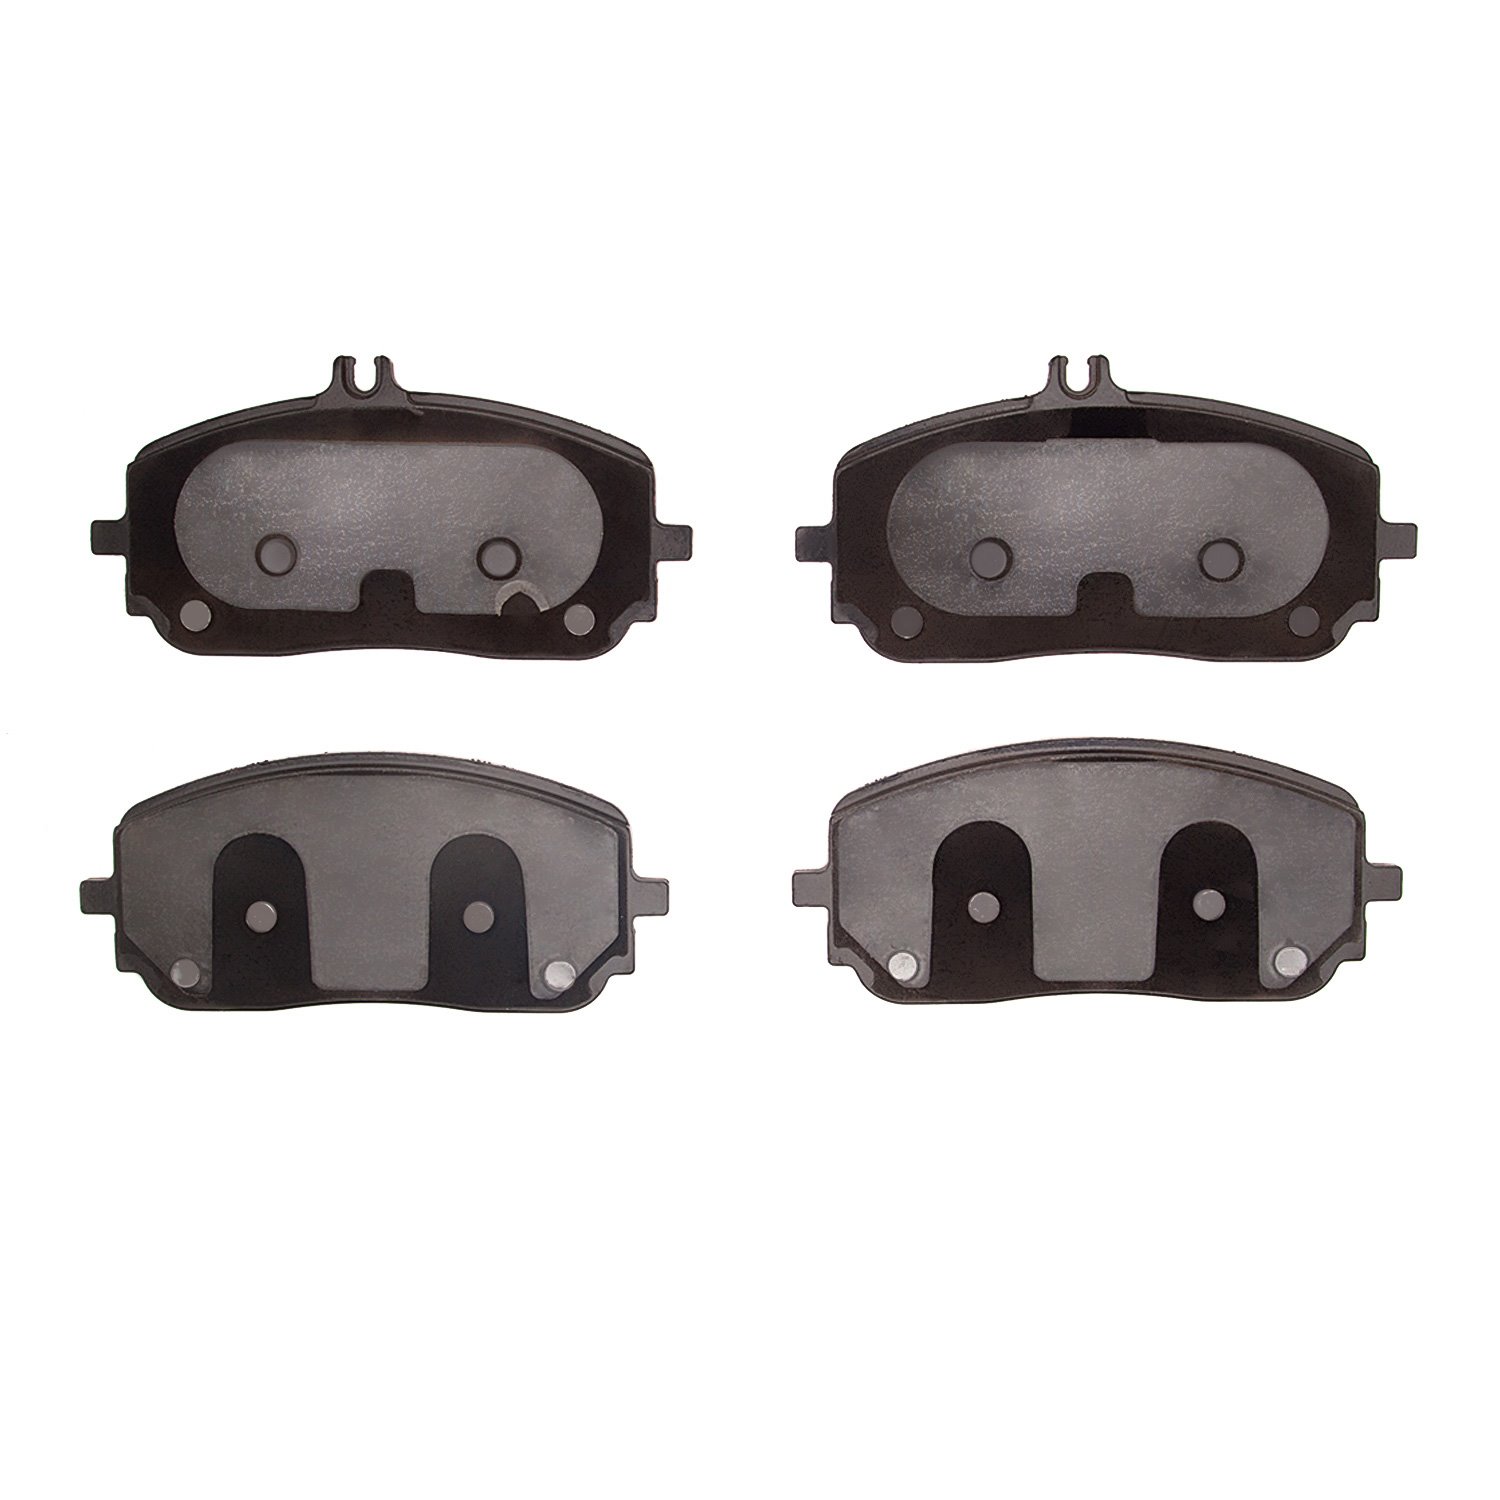 1551-2209-00 5000 Advanced Low-Metallic Brake Pads, Fits Select Mercedes-Benz, Position: Front